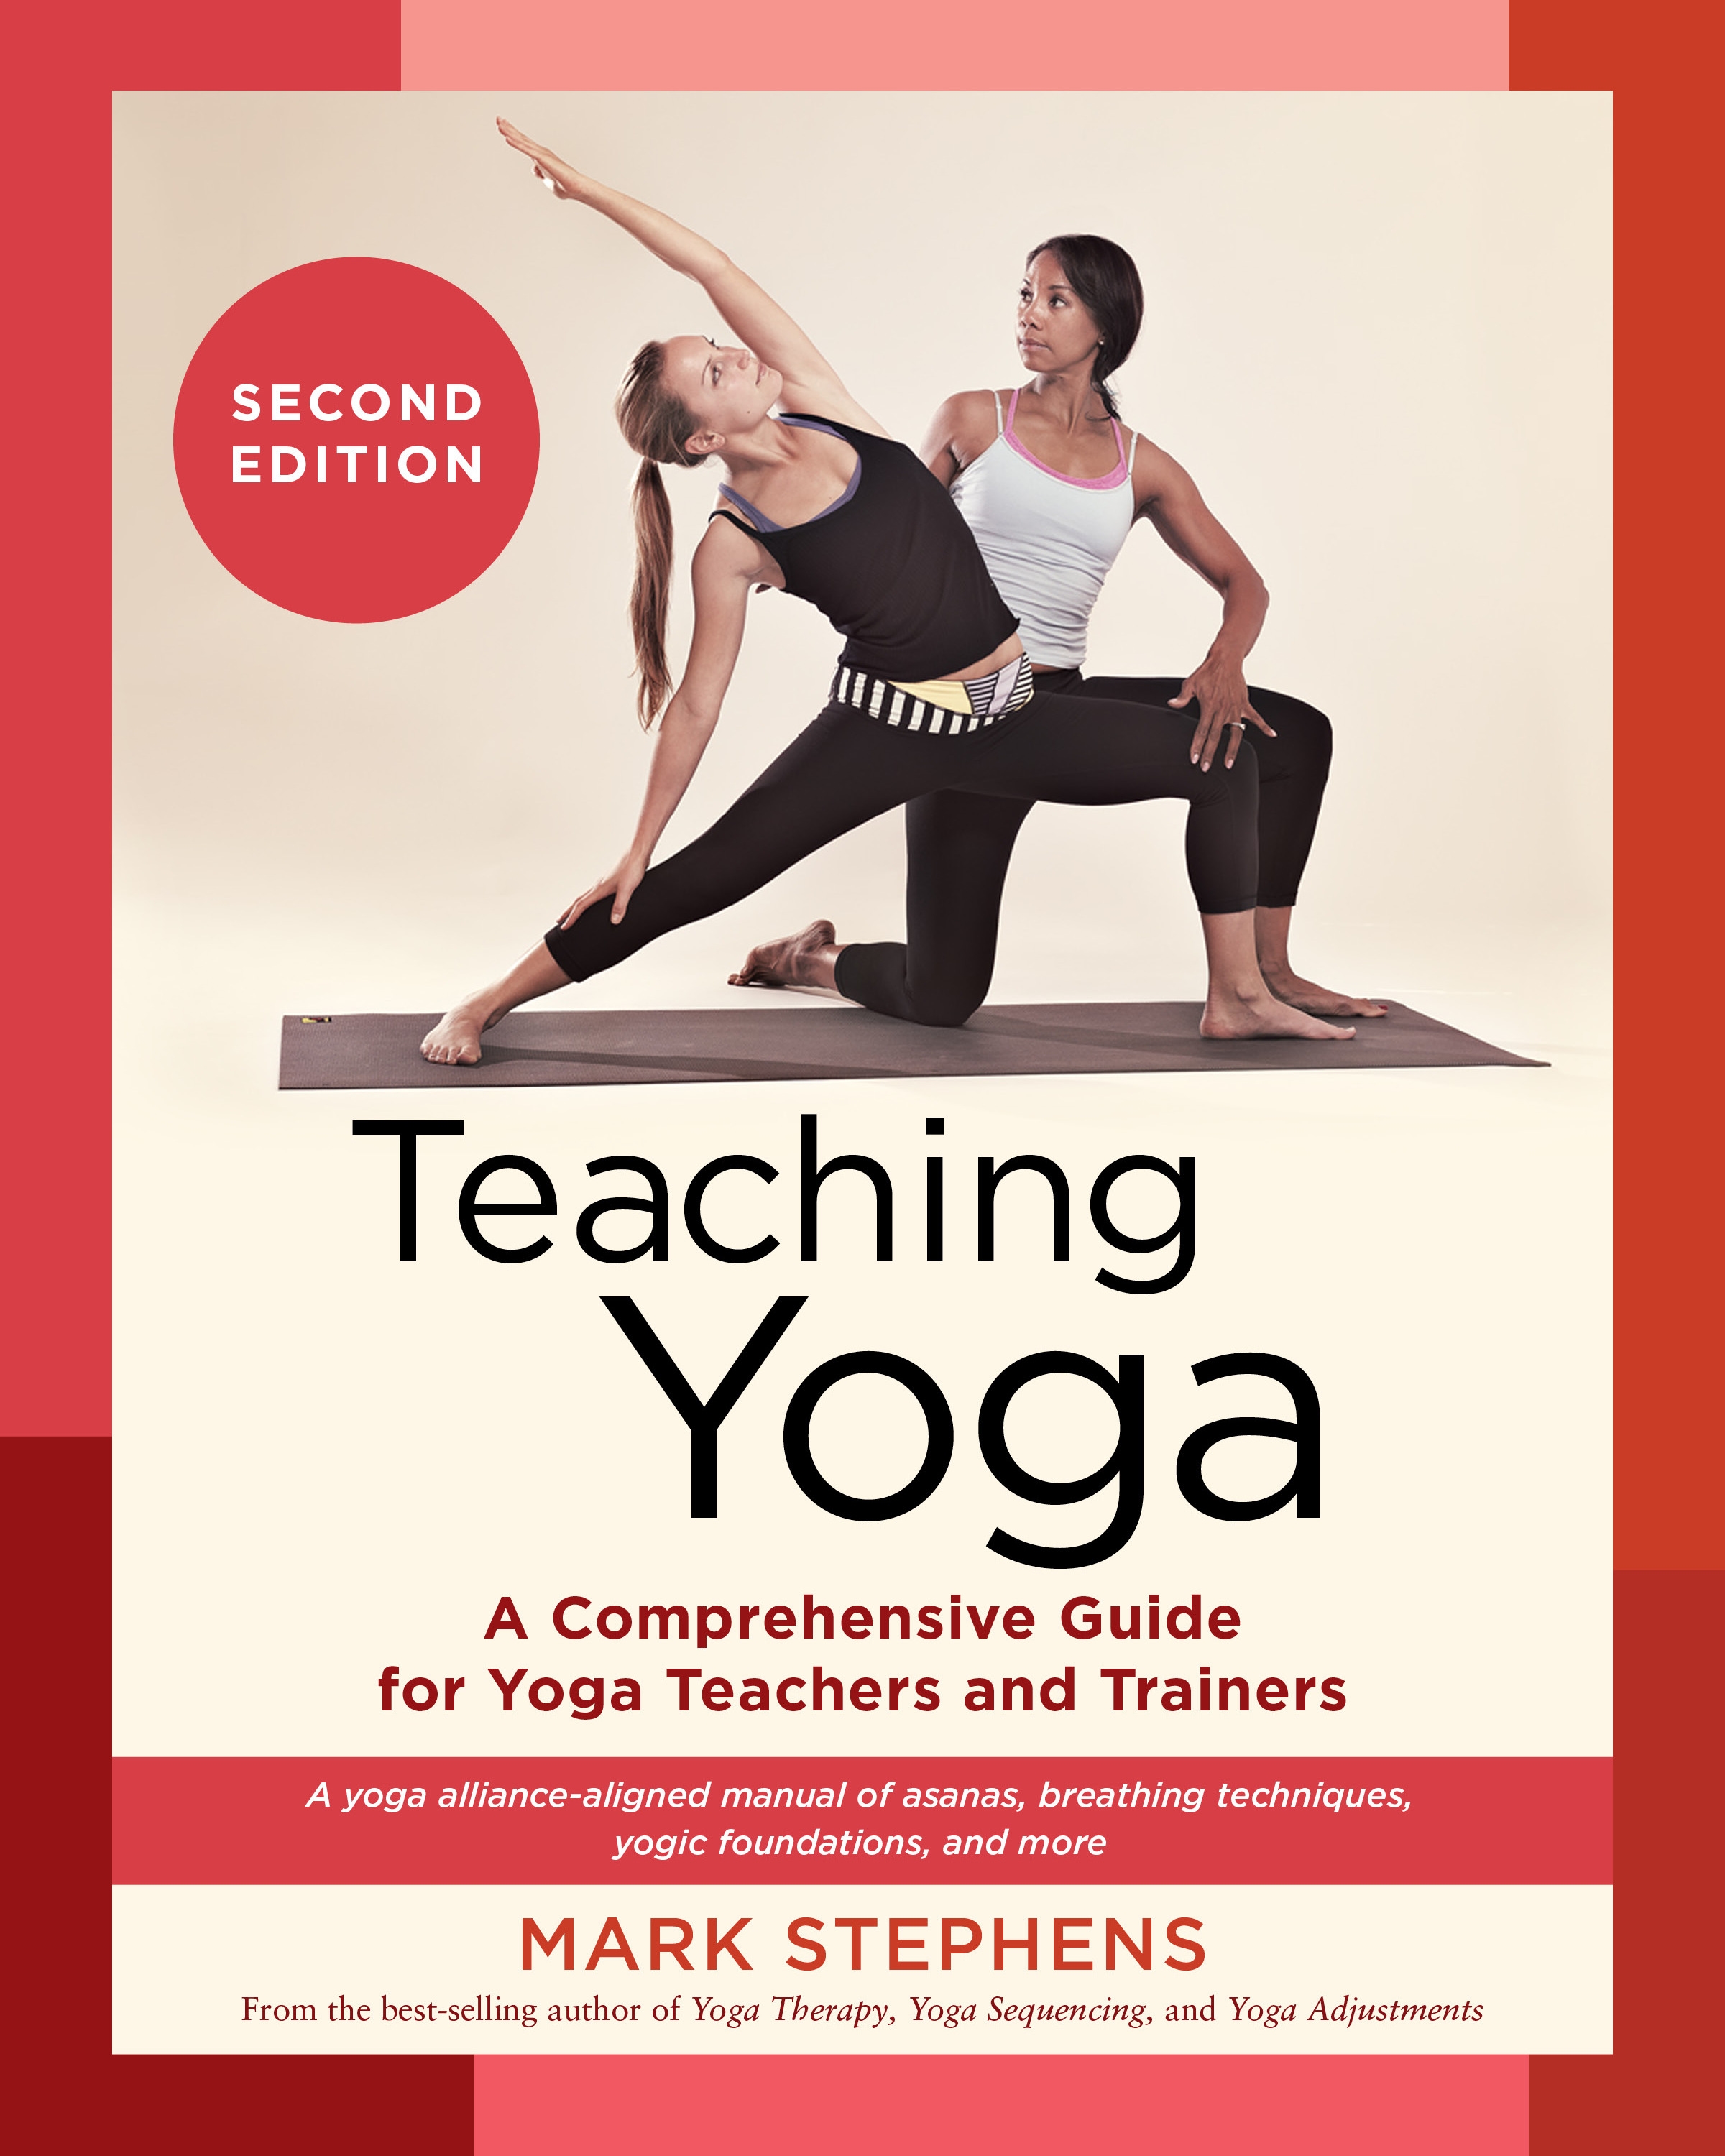 The Art and Business of Teaching Yoga (revised): The Yoga